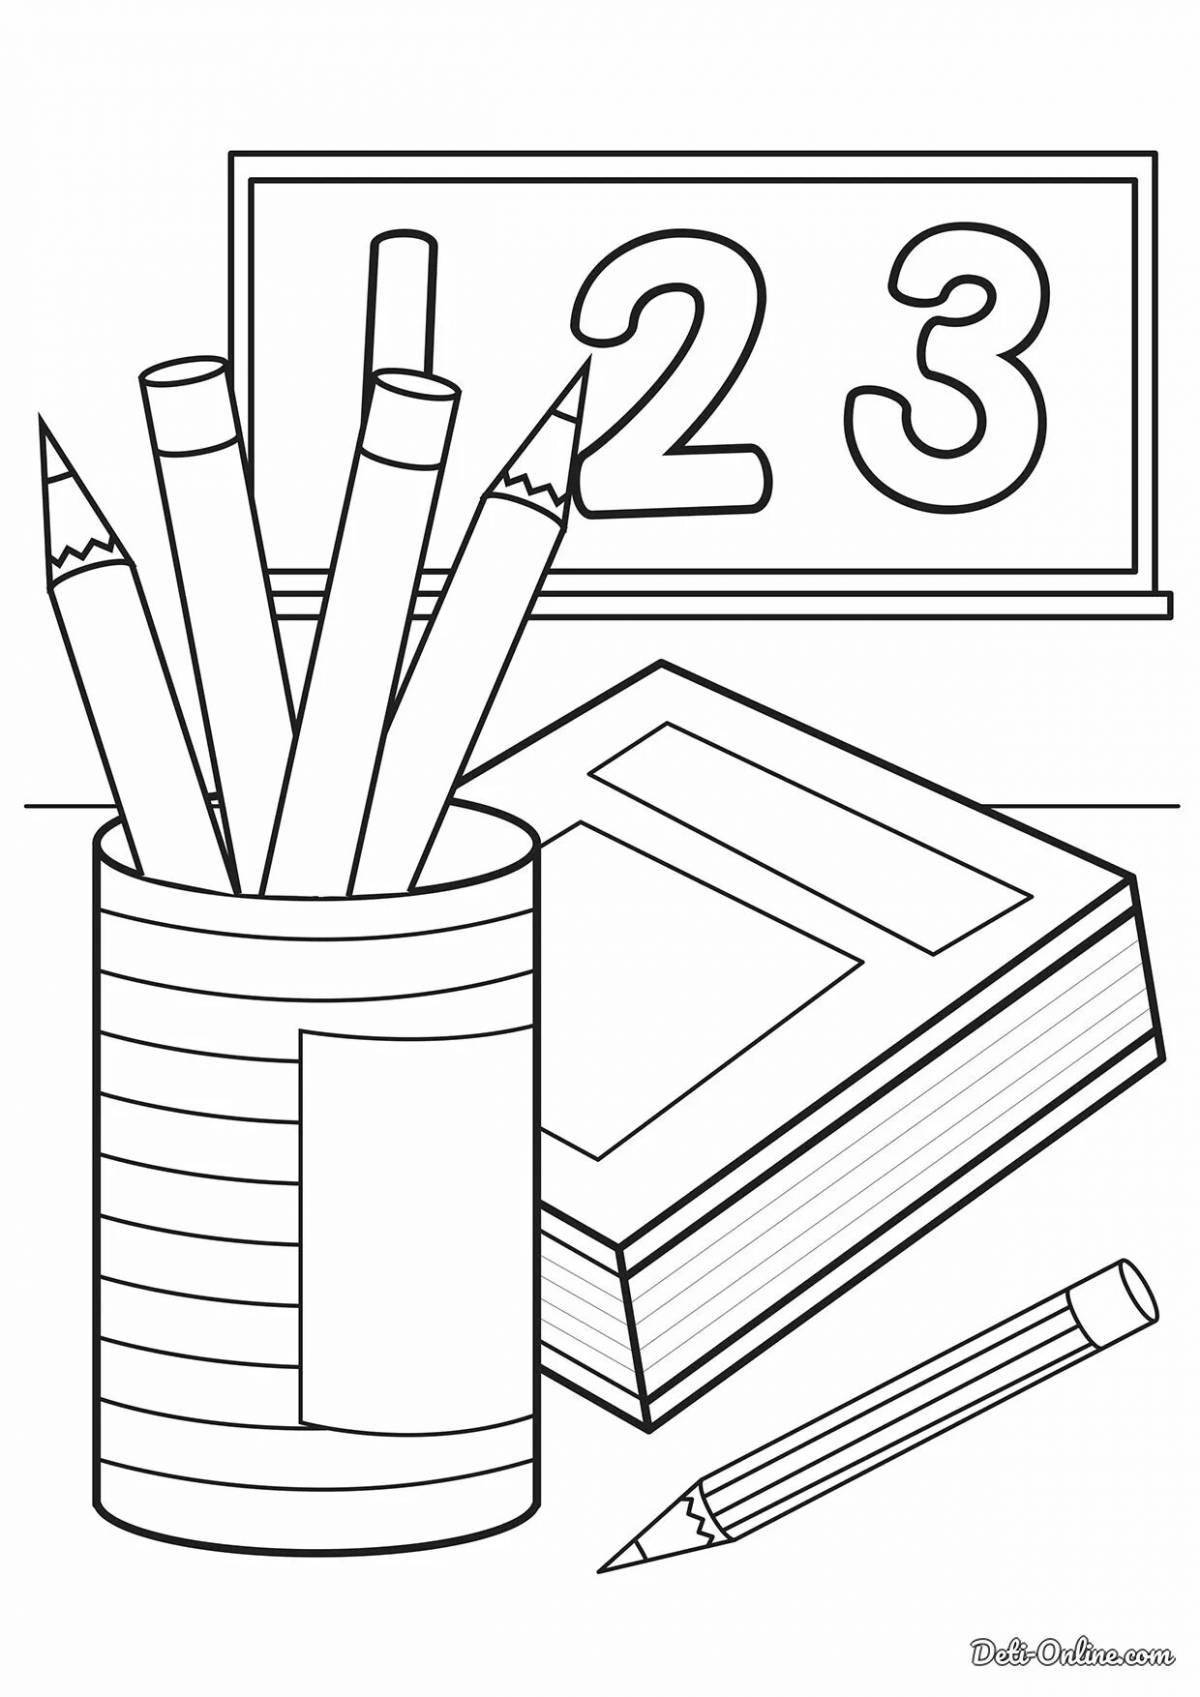 Colorful and joyful coloring for elementary school